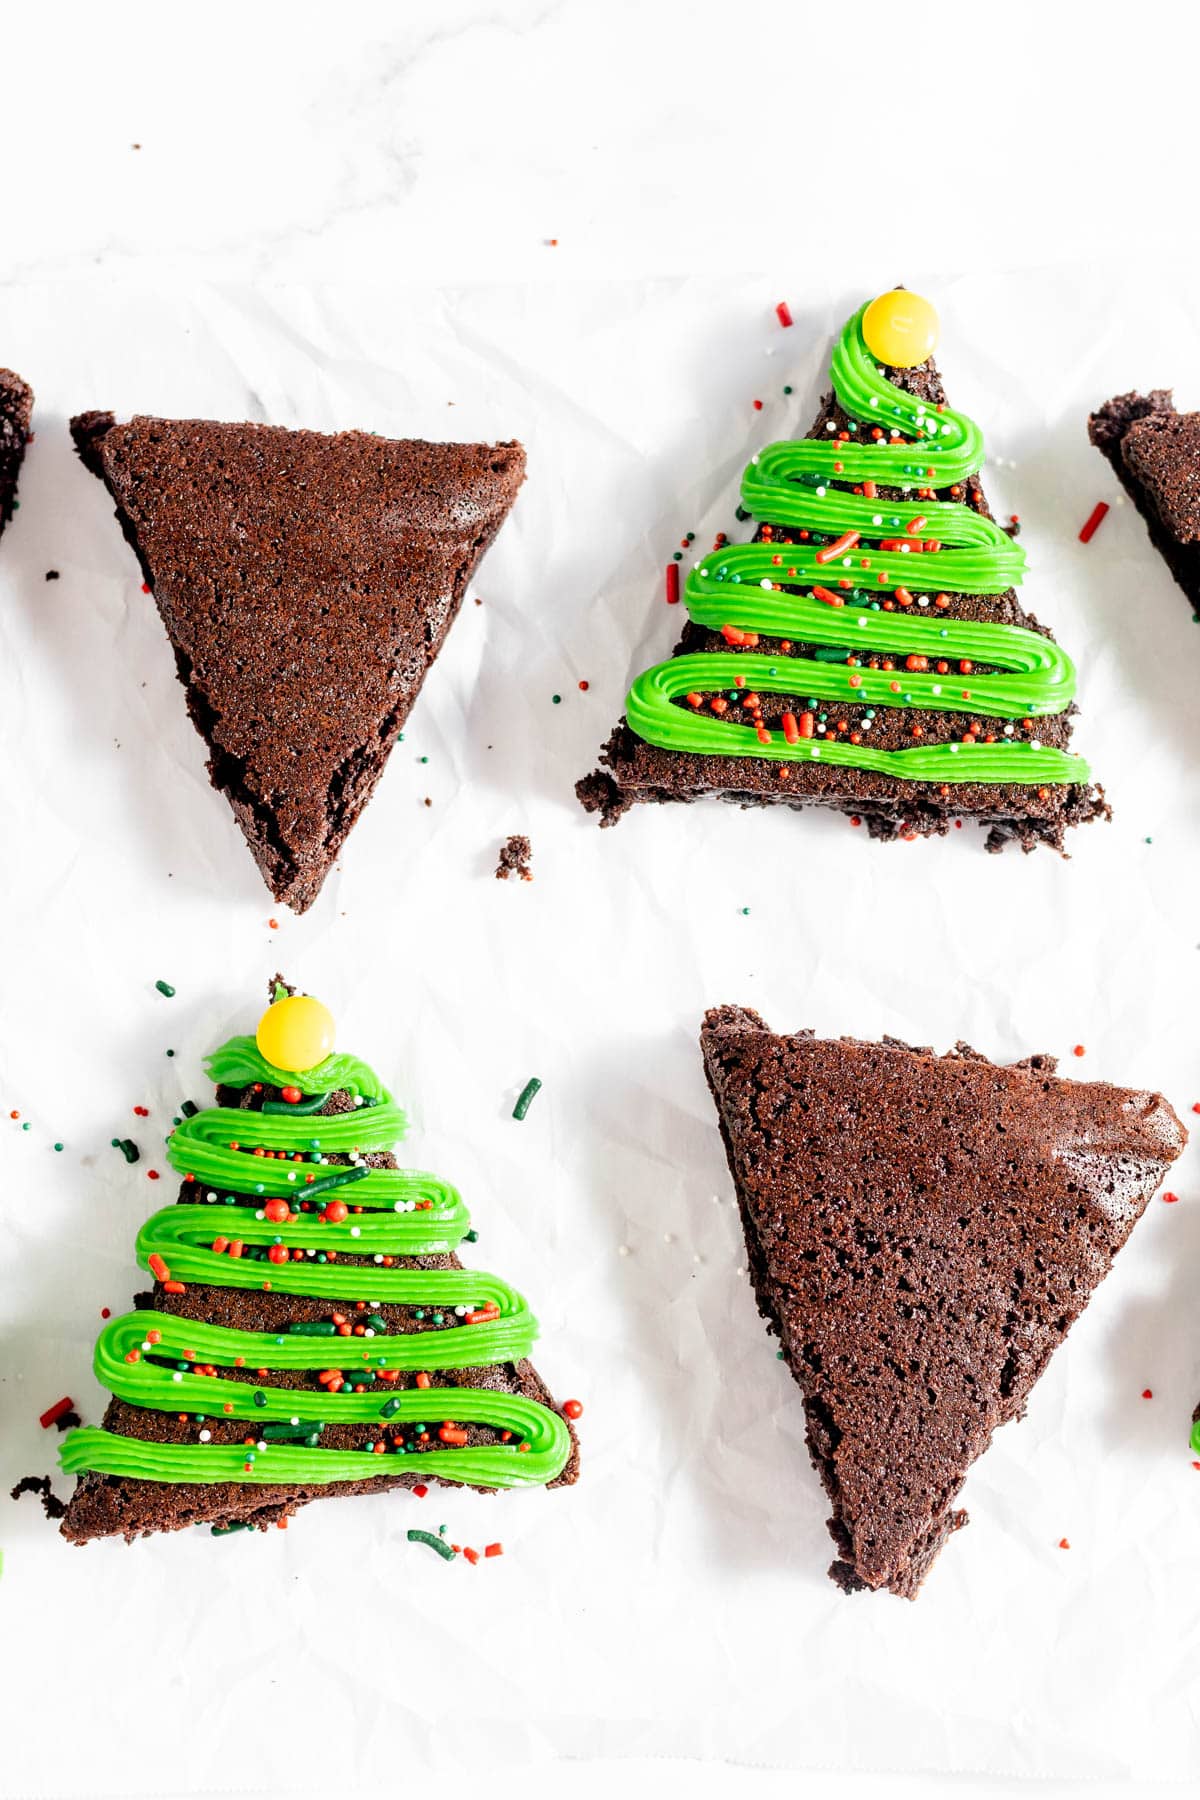 Four Christmas brownies in the shape of triangles and decorated like Christmas trees with green frosting, M&Ms and Christmas sprinkles.